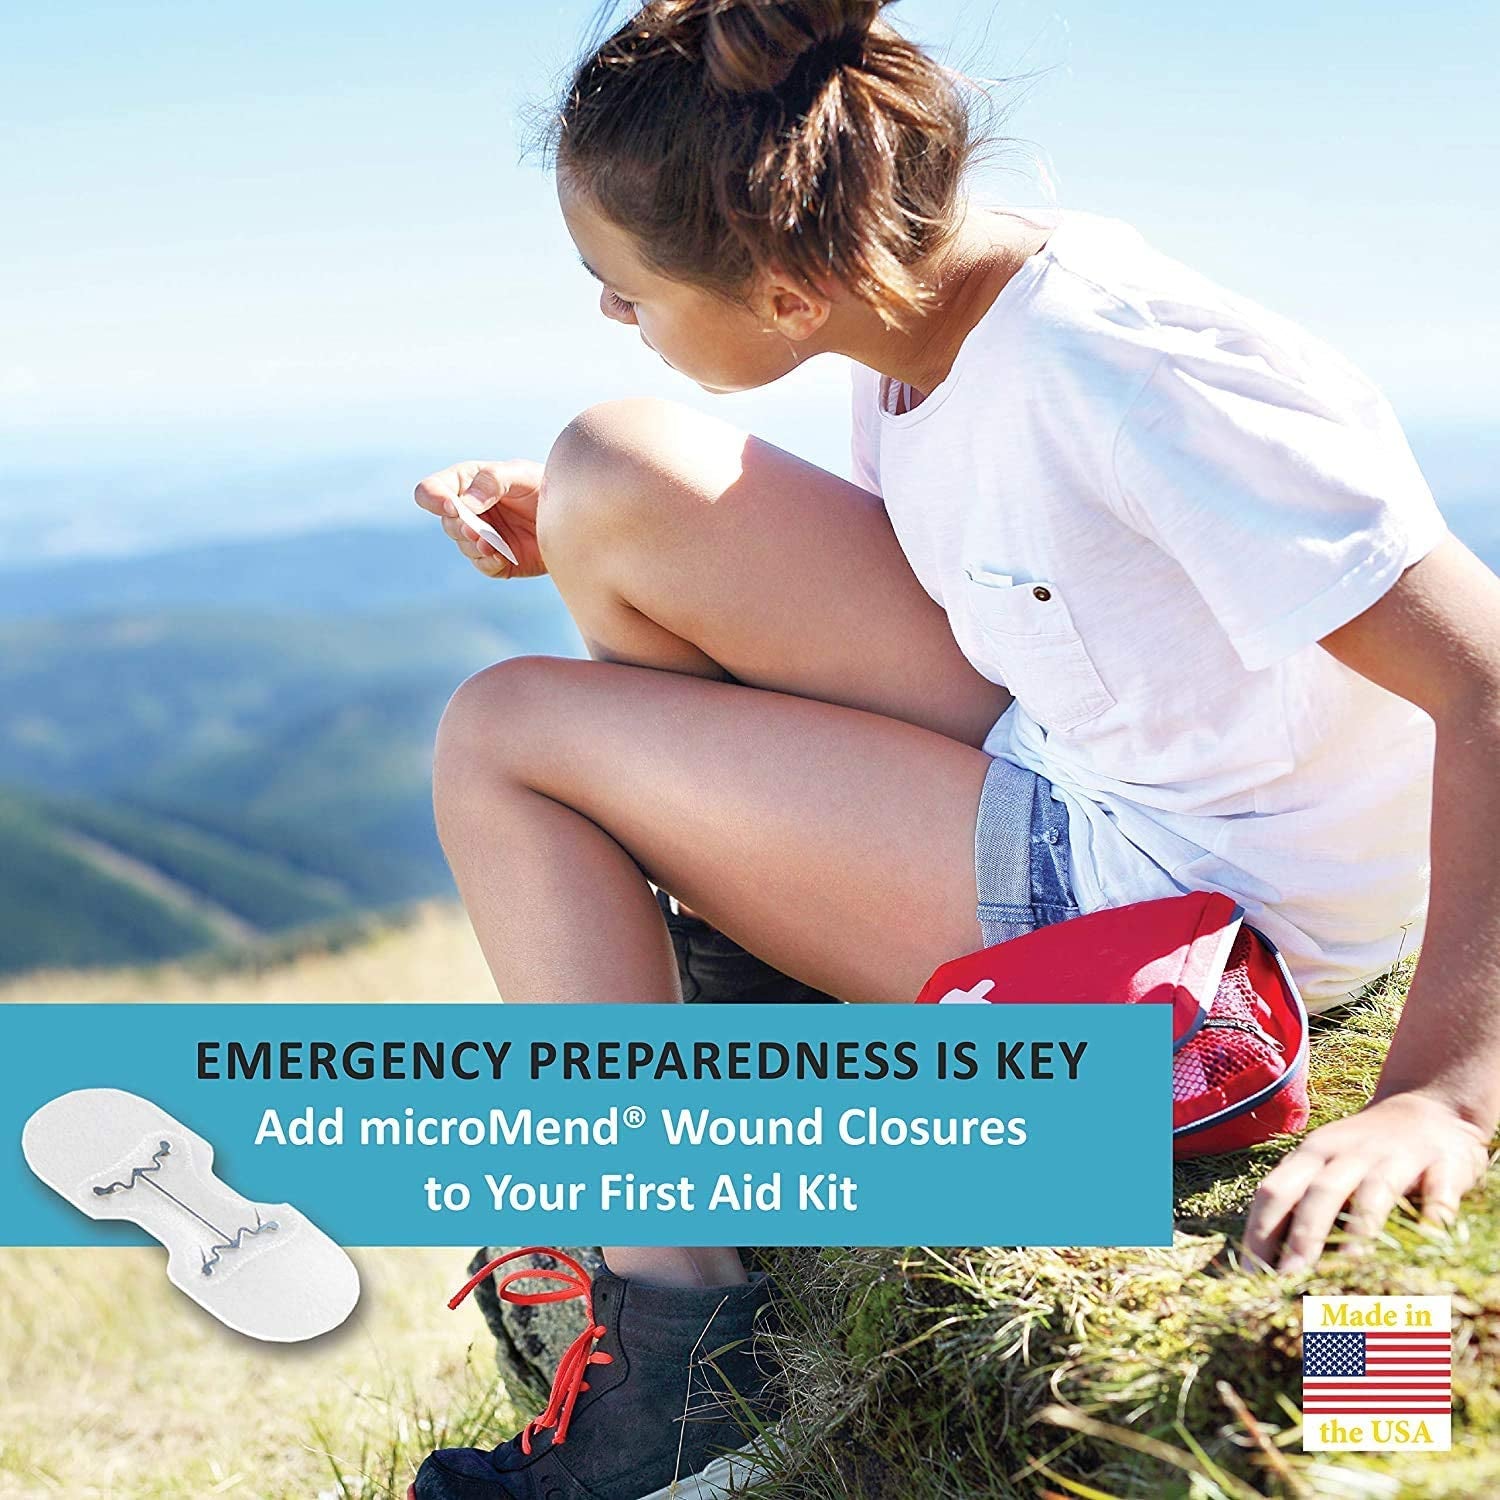 Emergency Wound Closures Surgical Quality Laceration Repair without Stitches - Think Ahead - Be Prepared - Add to Your Survival Kit, Camping Gear (Combo Pack - 2 Sizes: Small & Medium)